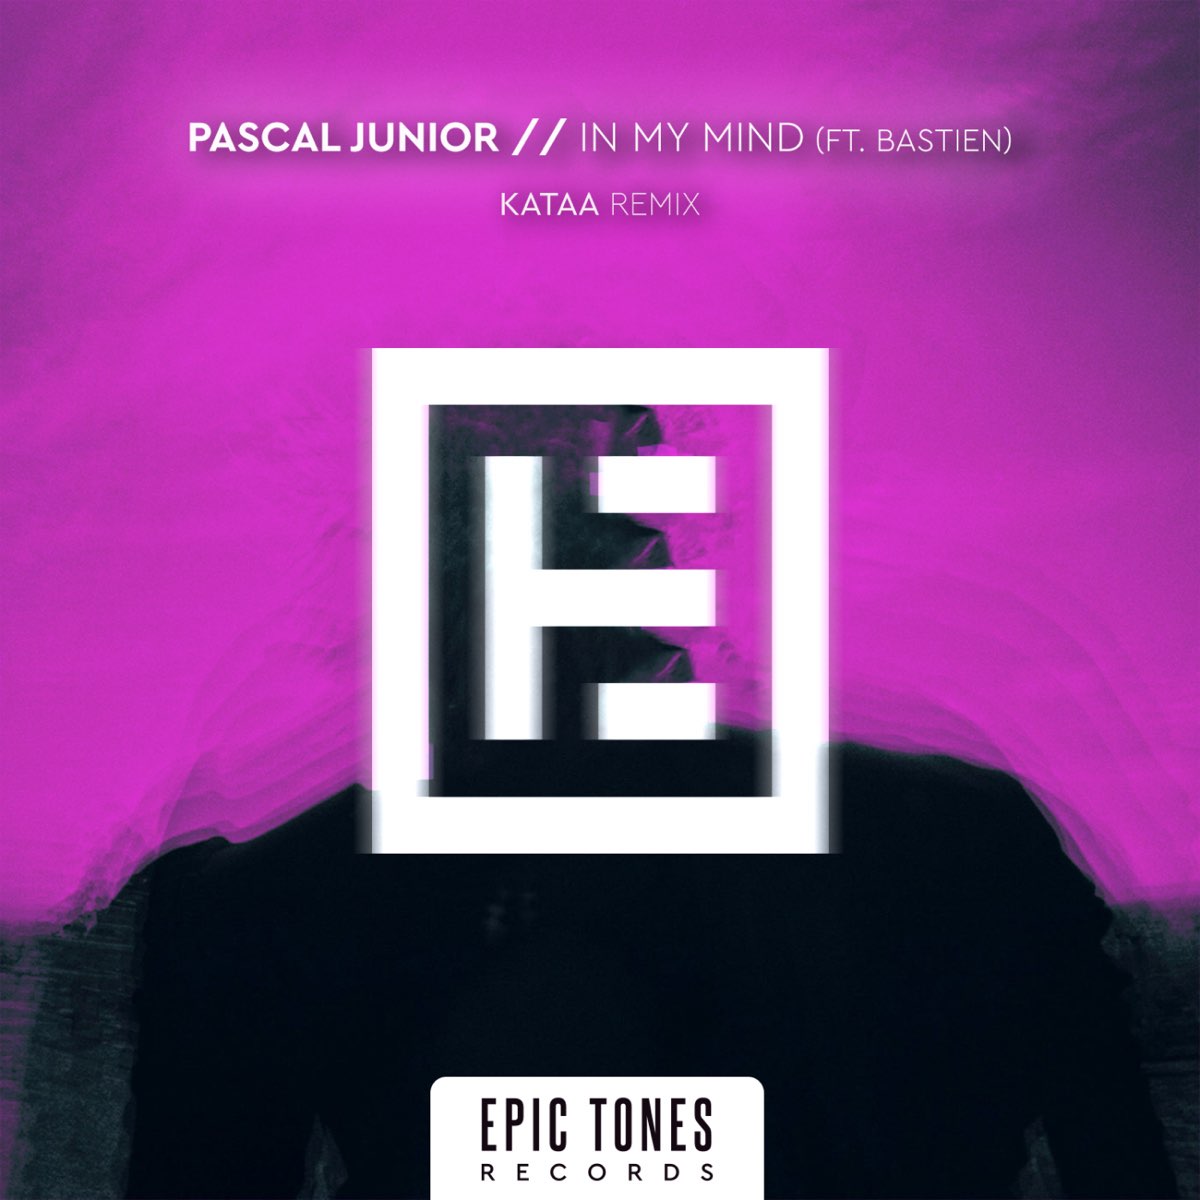 Pascal музыка. Pascal Junior - down you up.